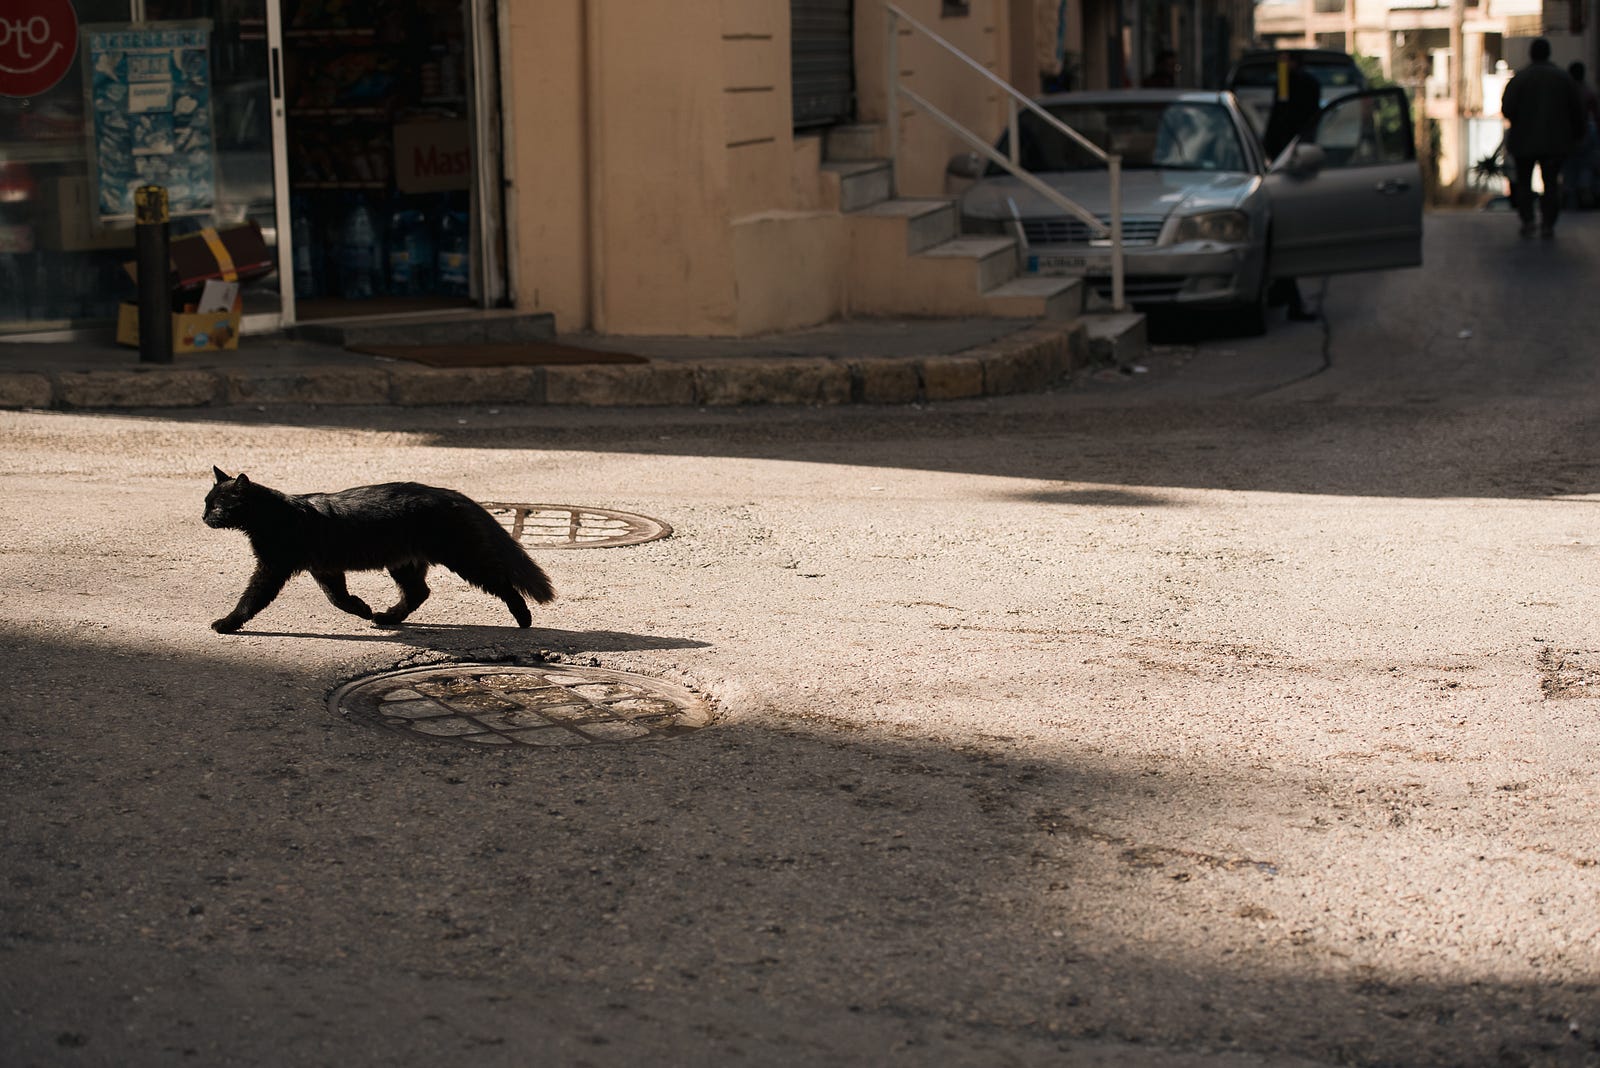 A black cat makes quick work of a street crossing.